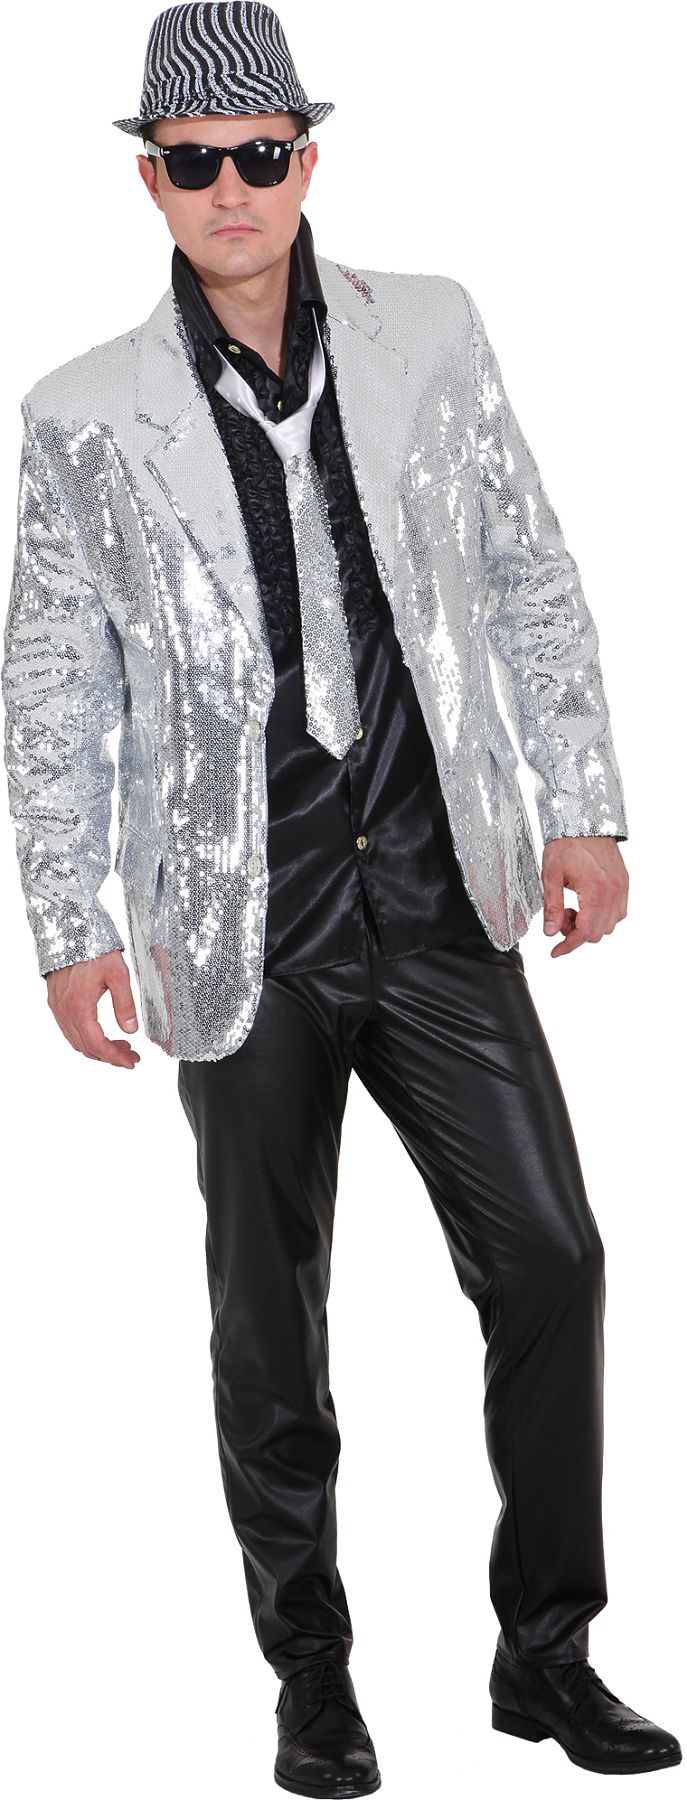 Show jacket, silver